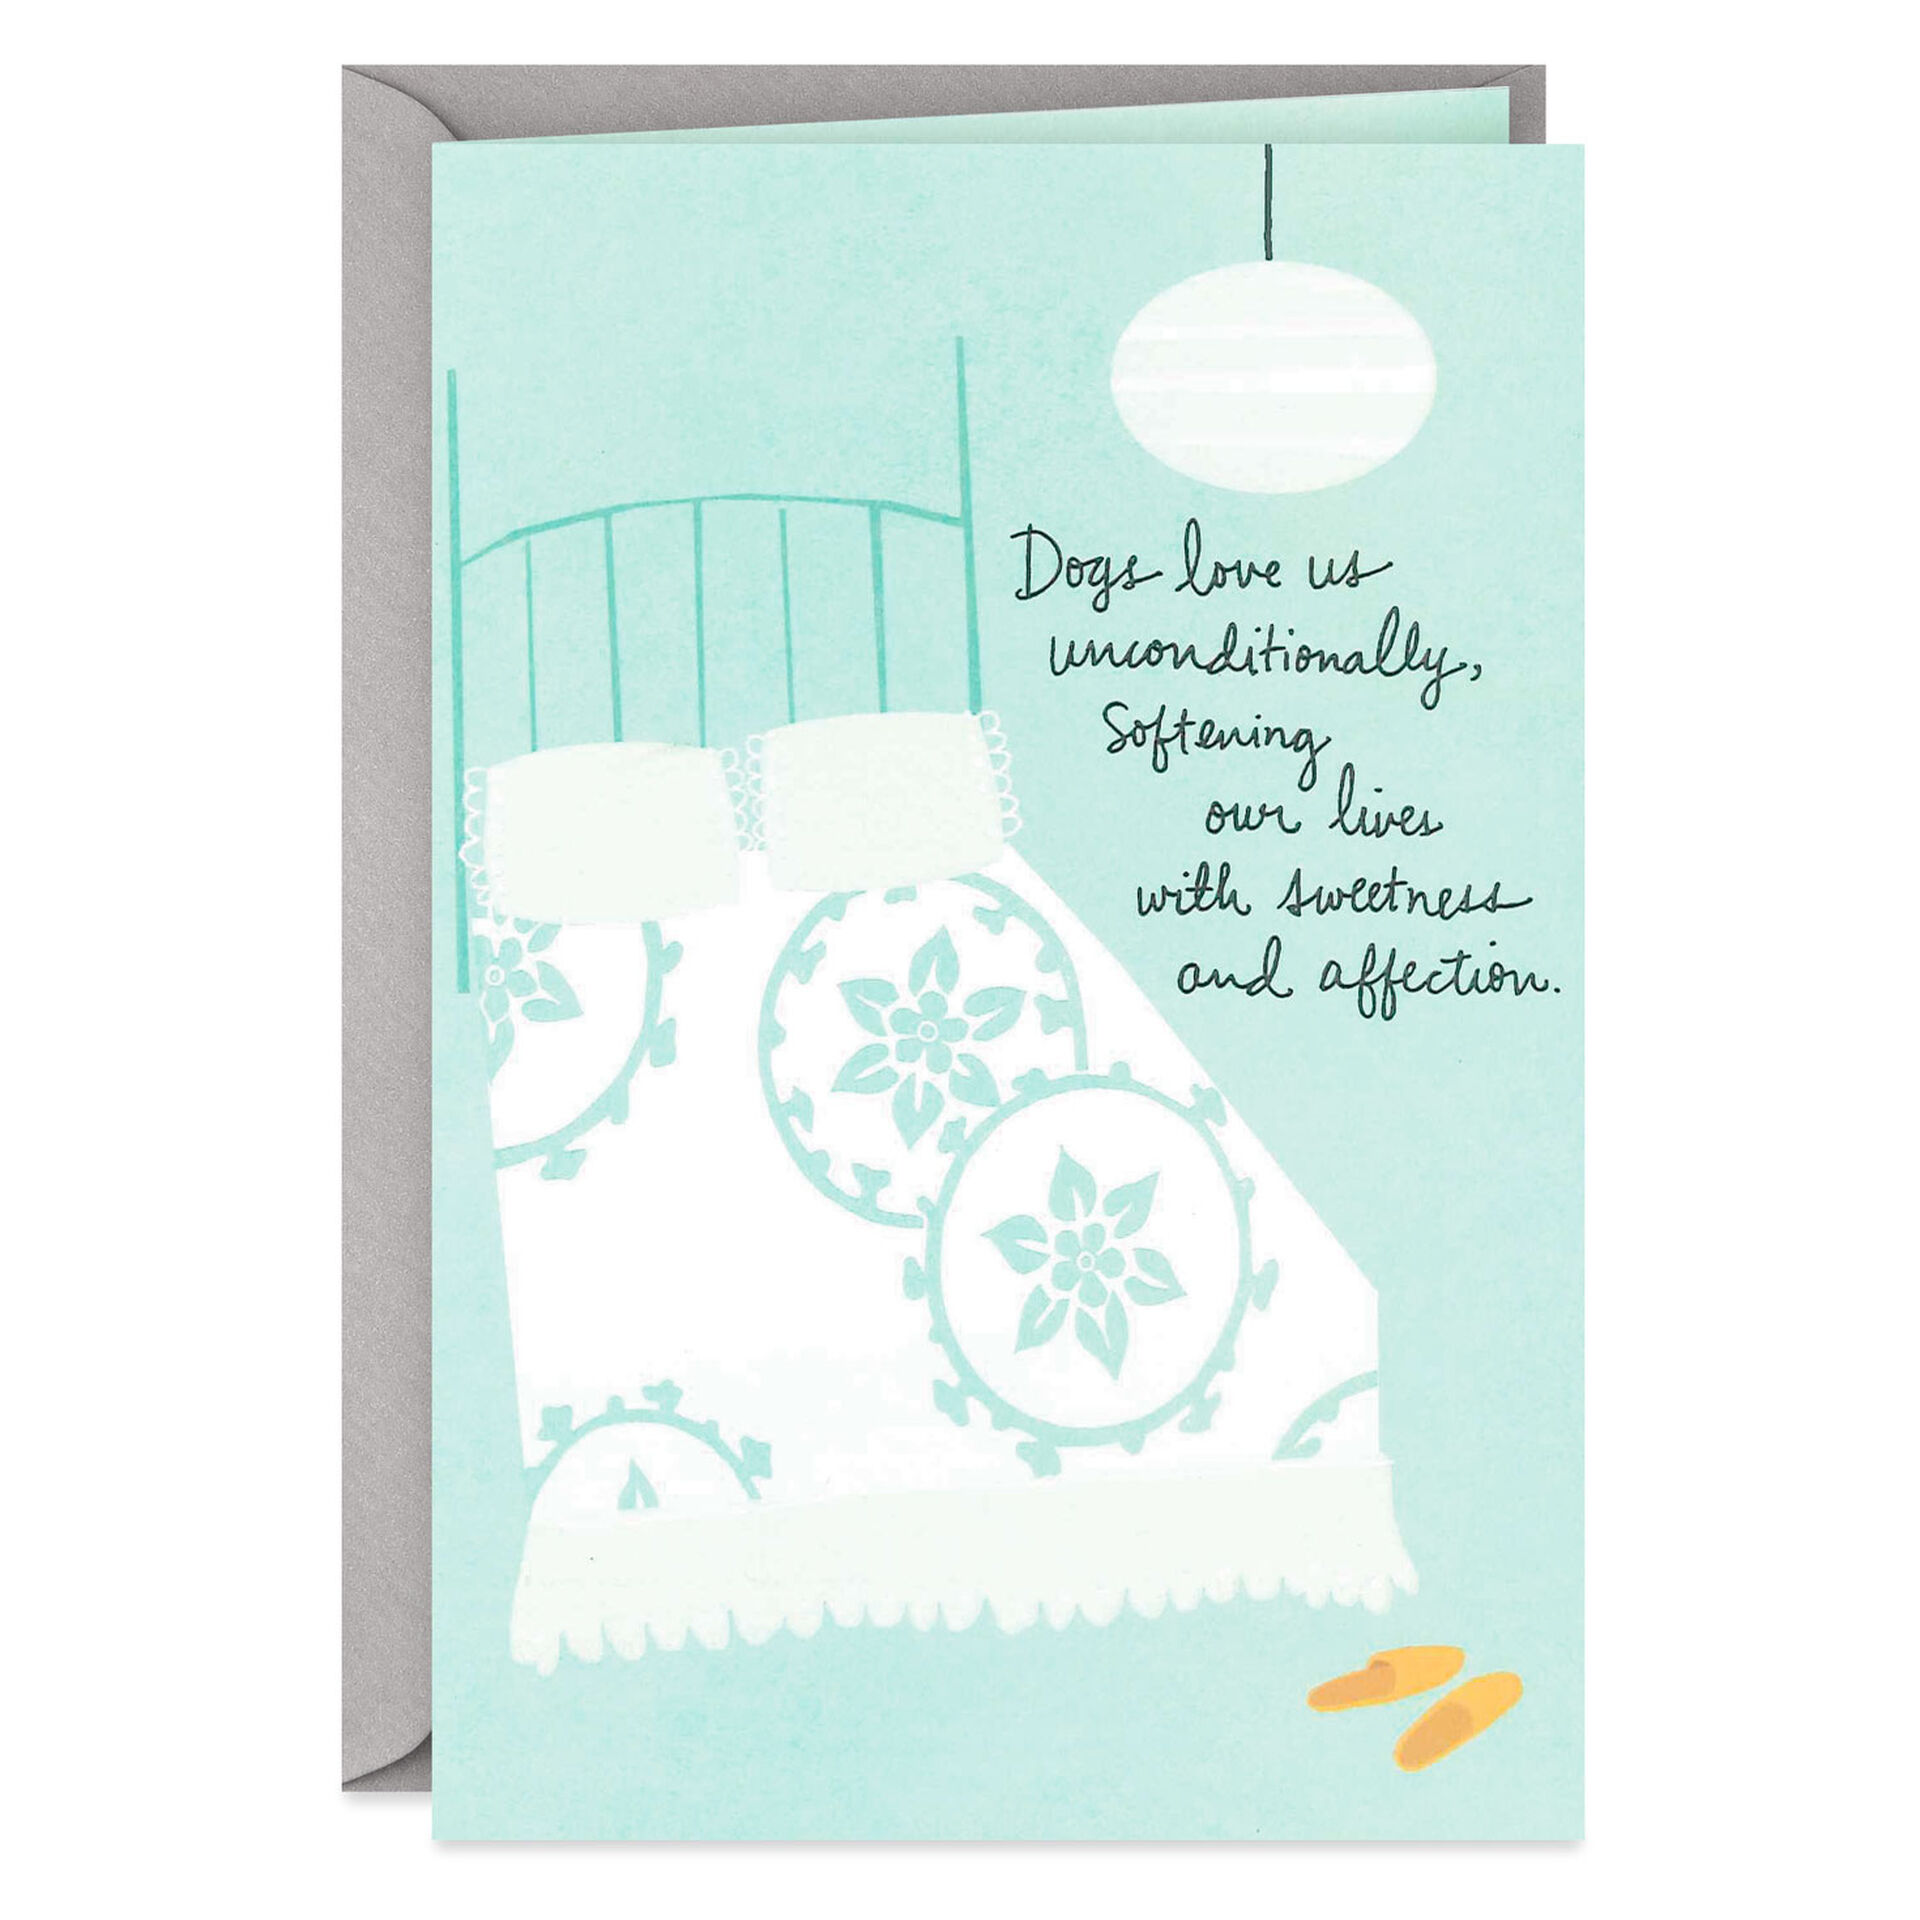 Slippers-by-Bed-Sympathy-Card-for-Loss-of-Dog_399S2640_01